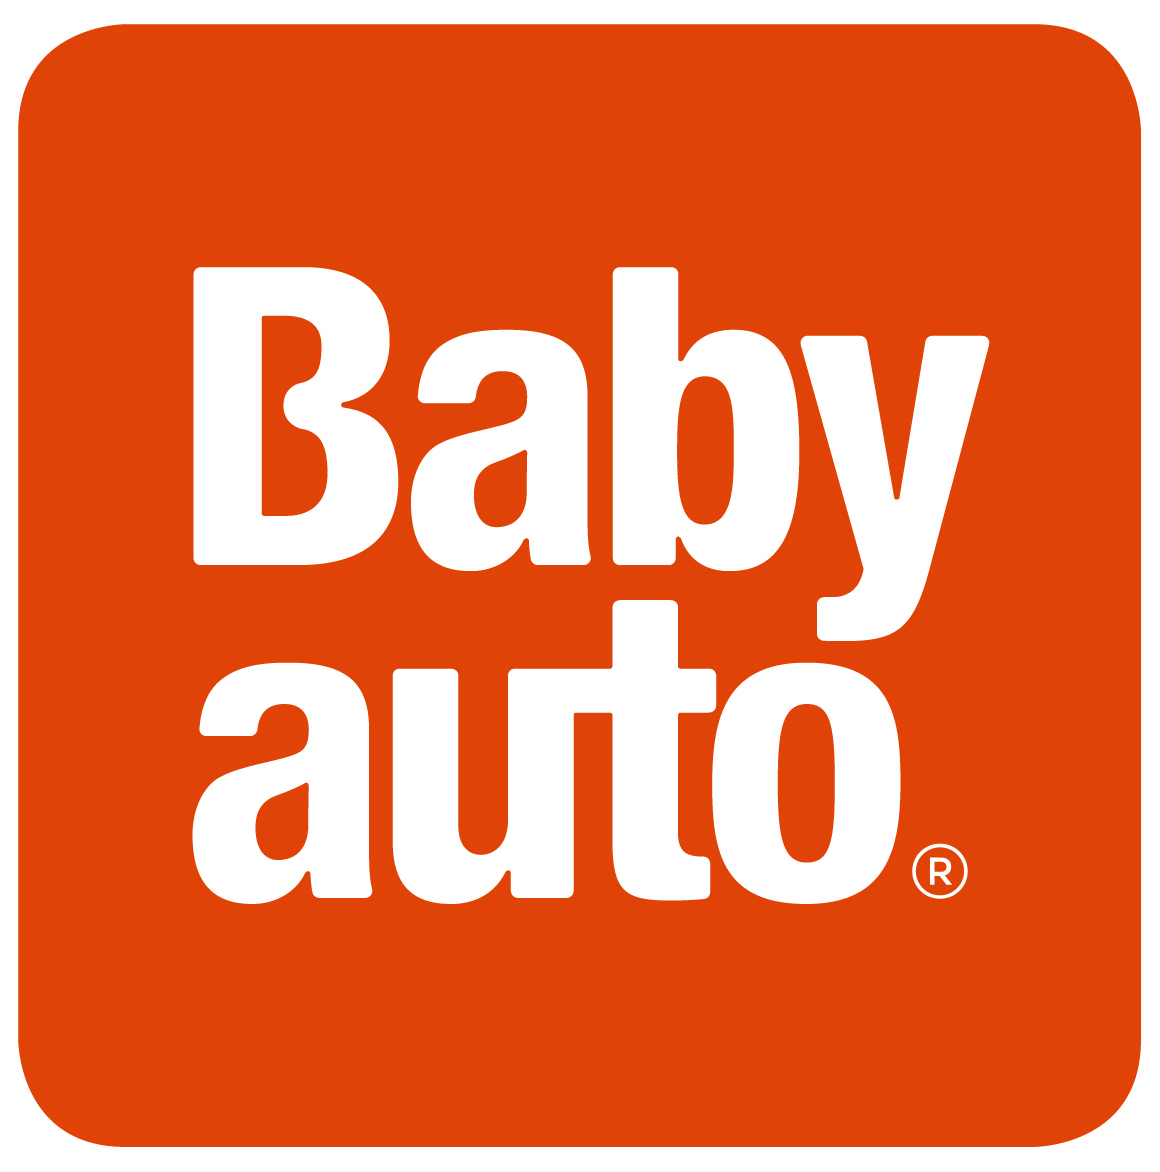 Babyauto®, Specialists in car seats for babies and children